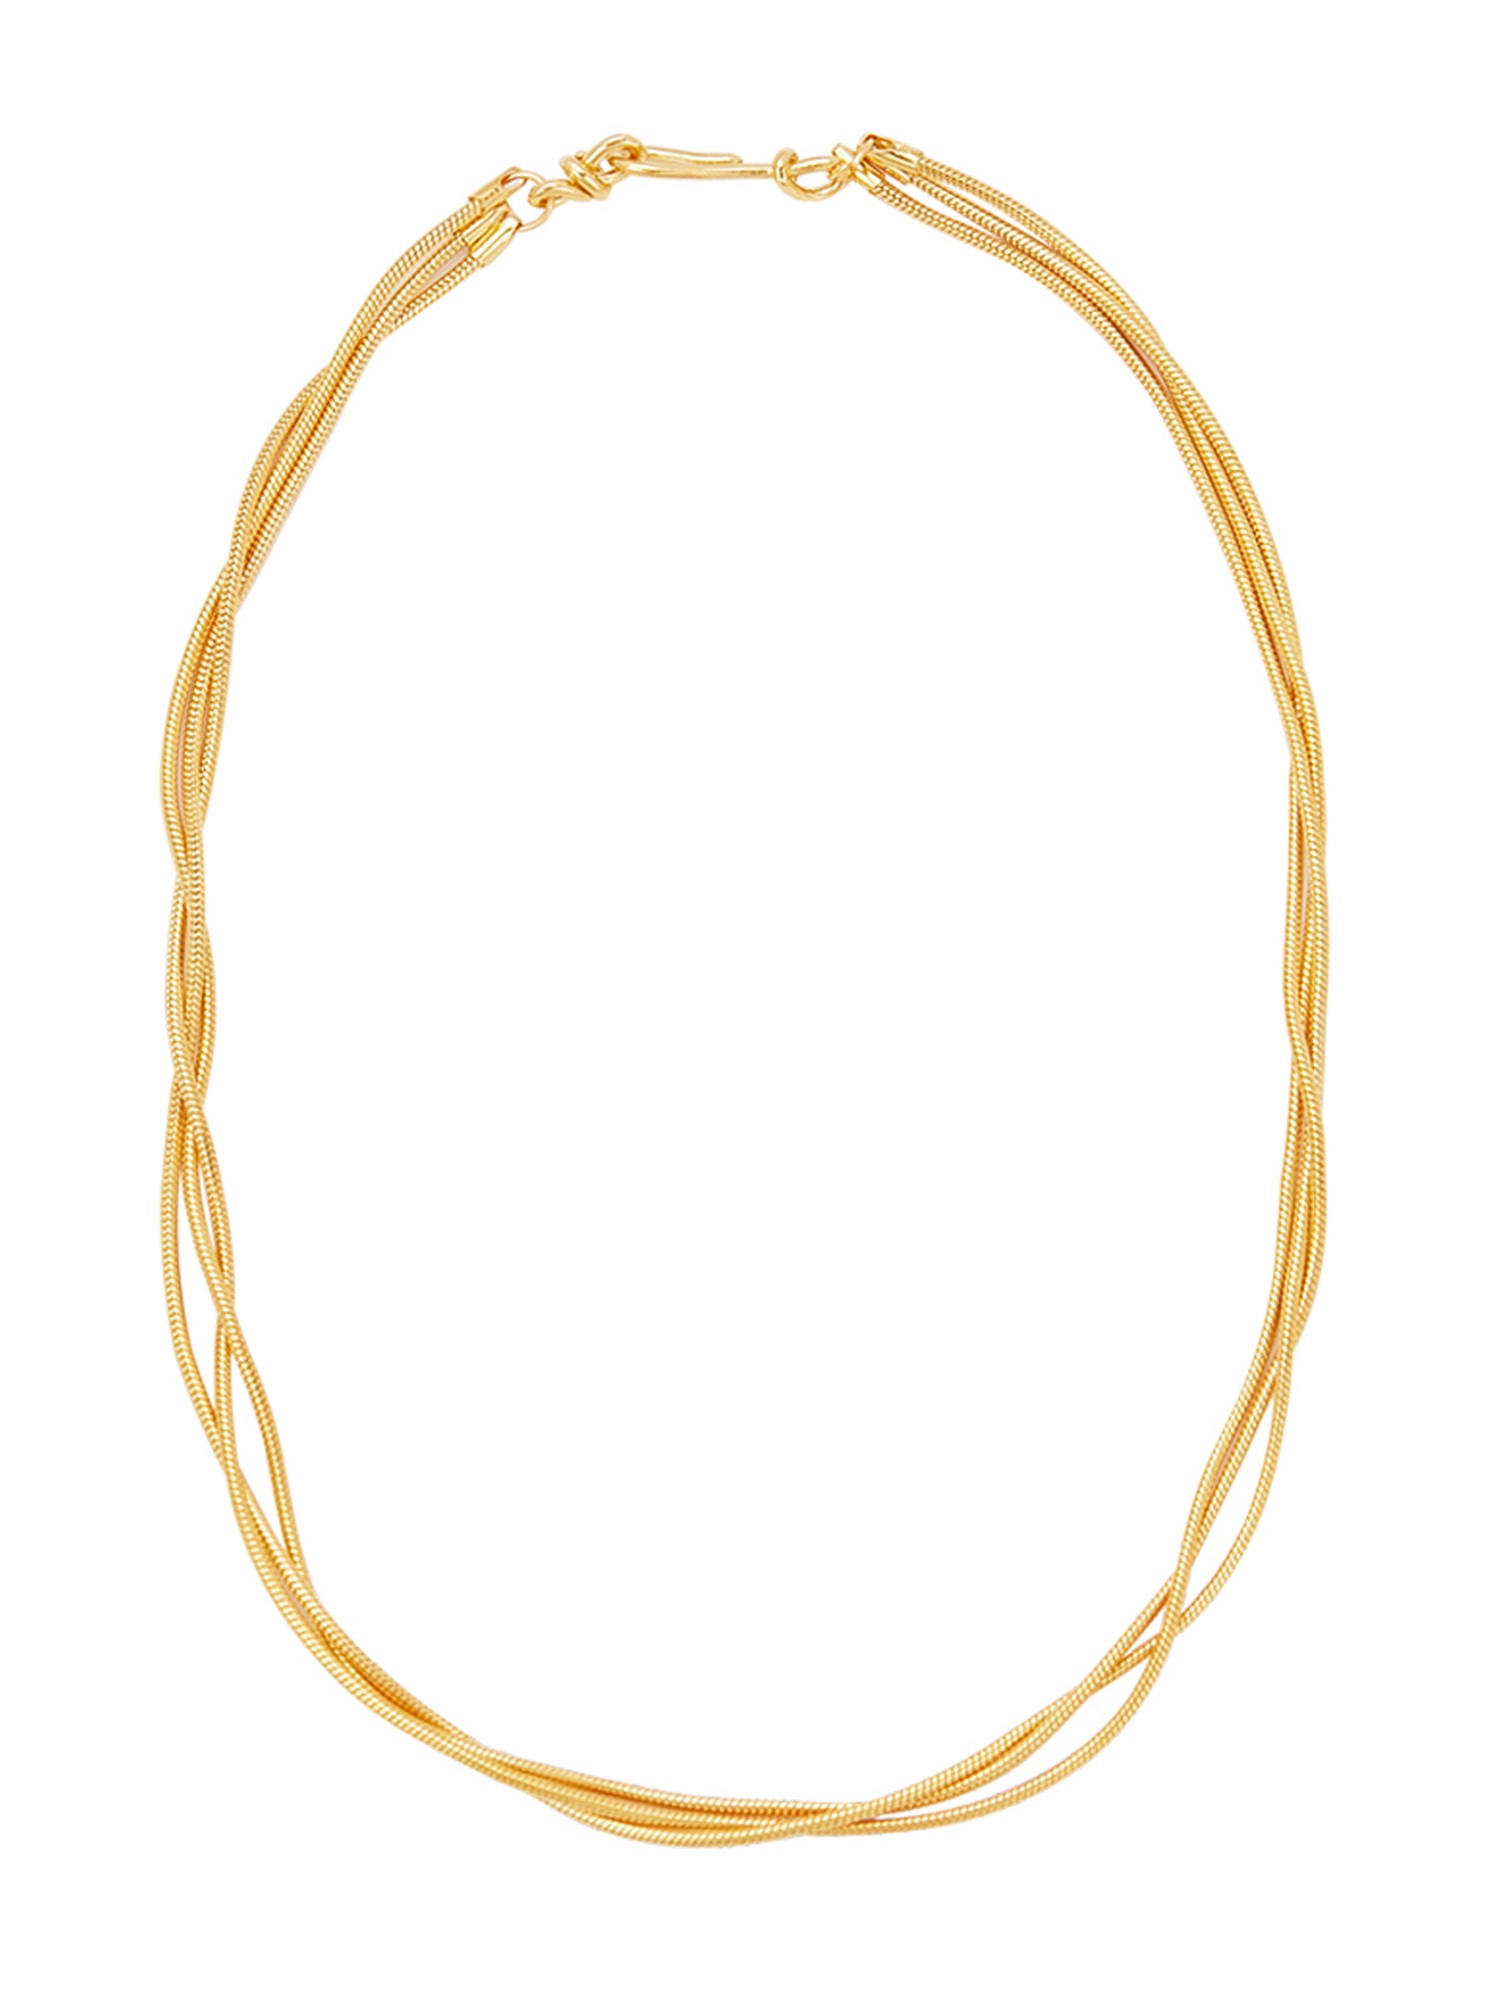 Mate Necklace - Gold